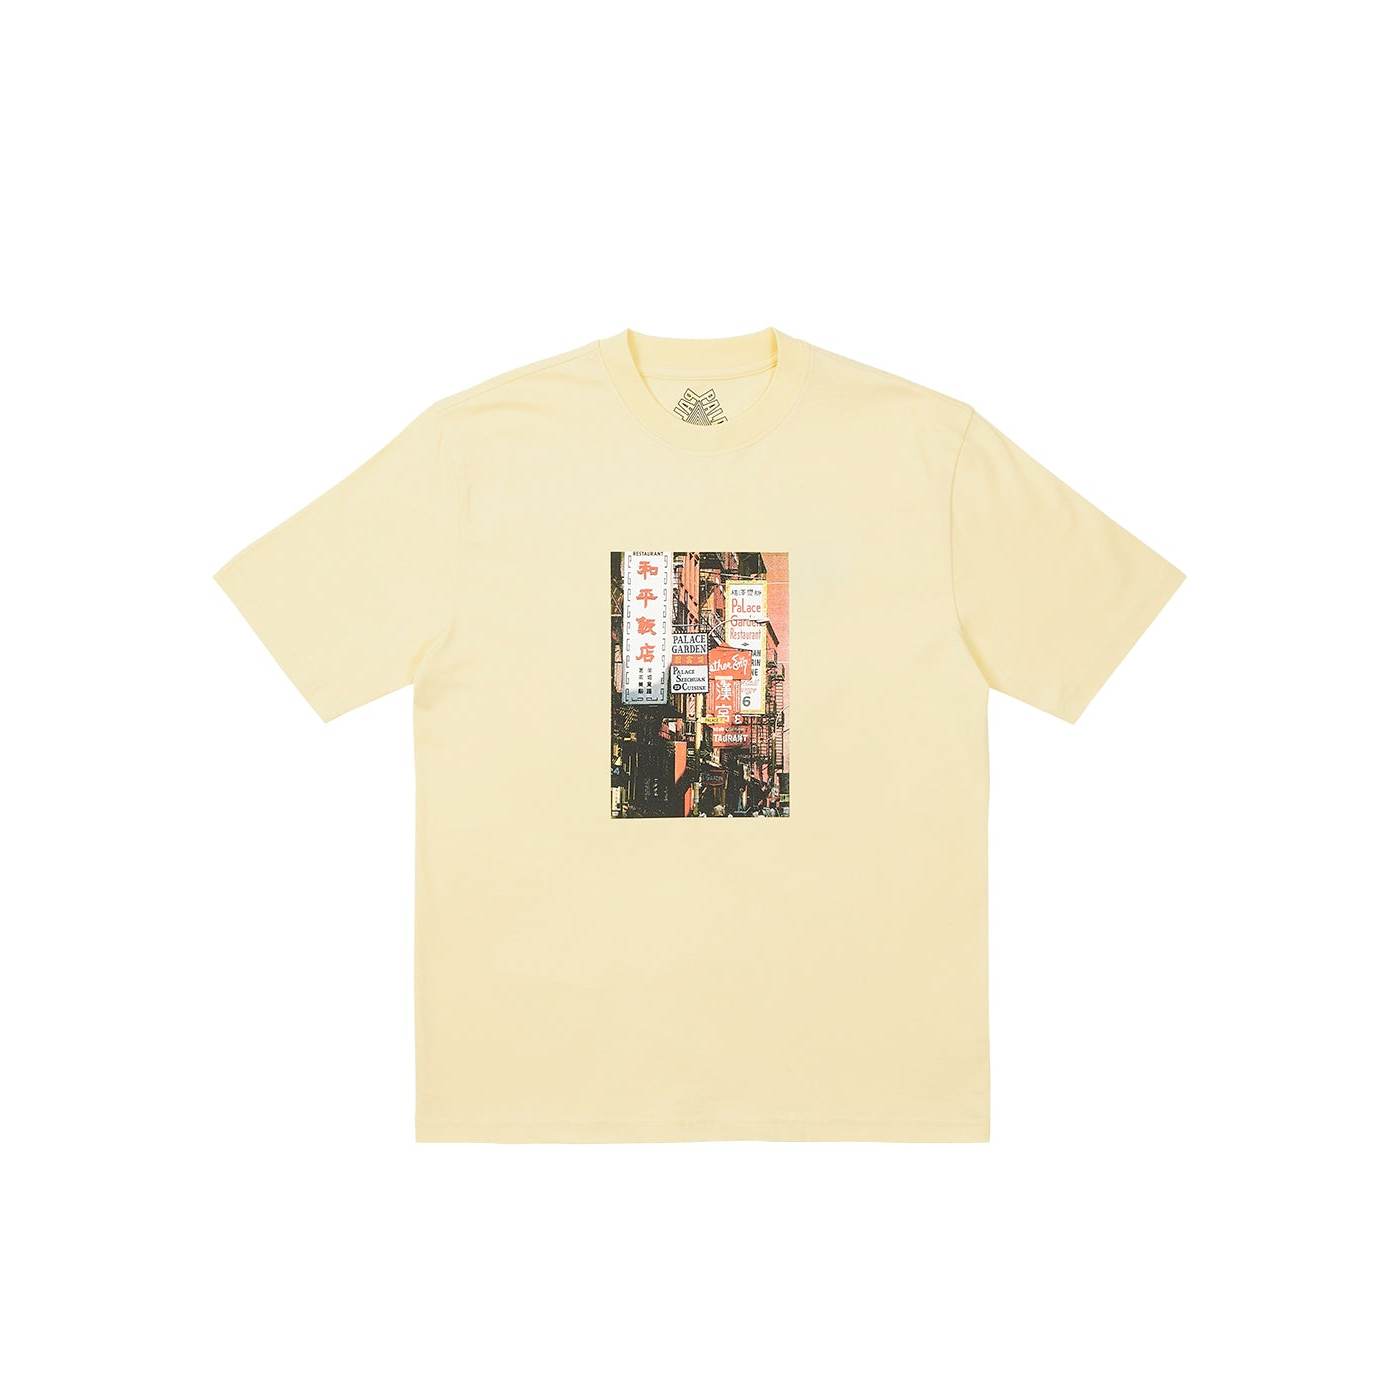 Thumbnail DOWNTOWN T-SHIRT MELLOW YELLOW one color